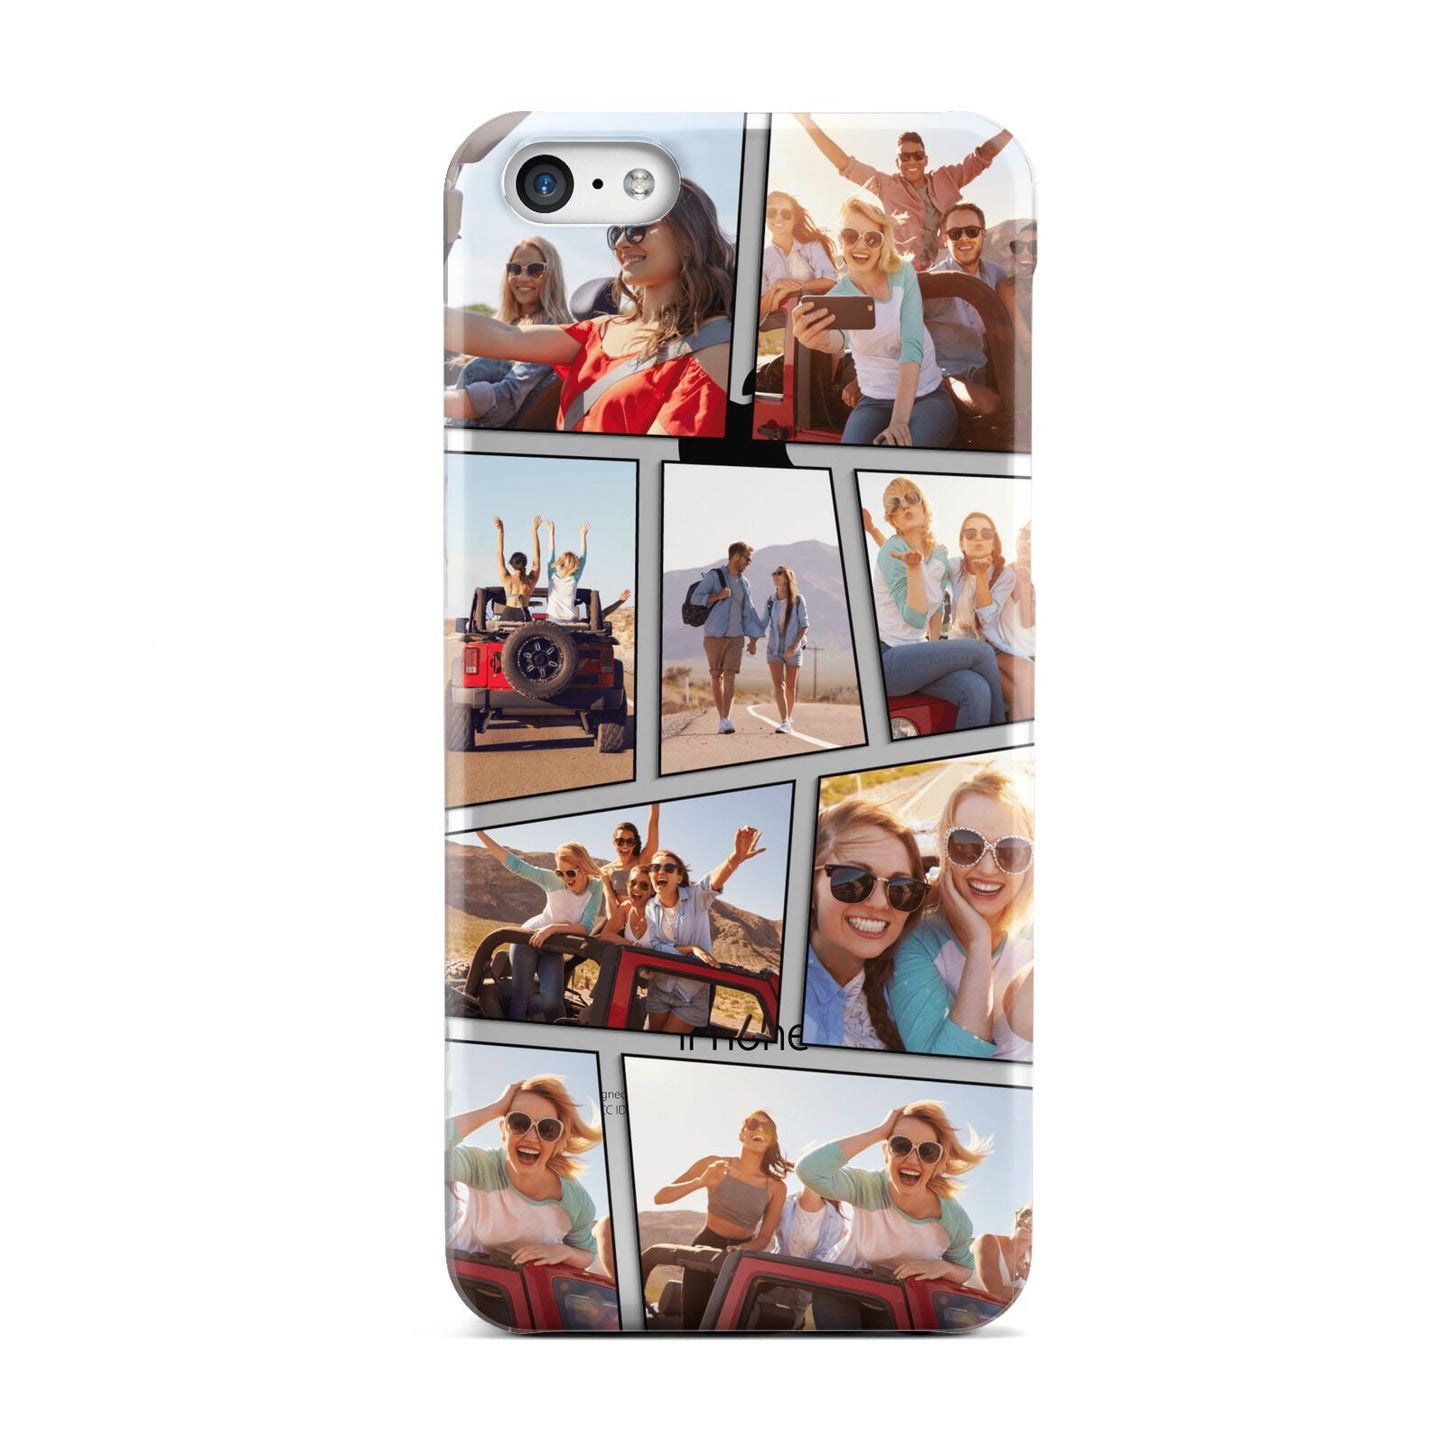 Abstract Comic Strip Photo Apple iPhone 5c Case